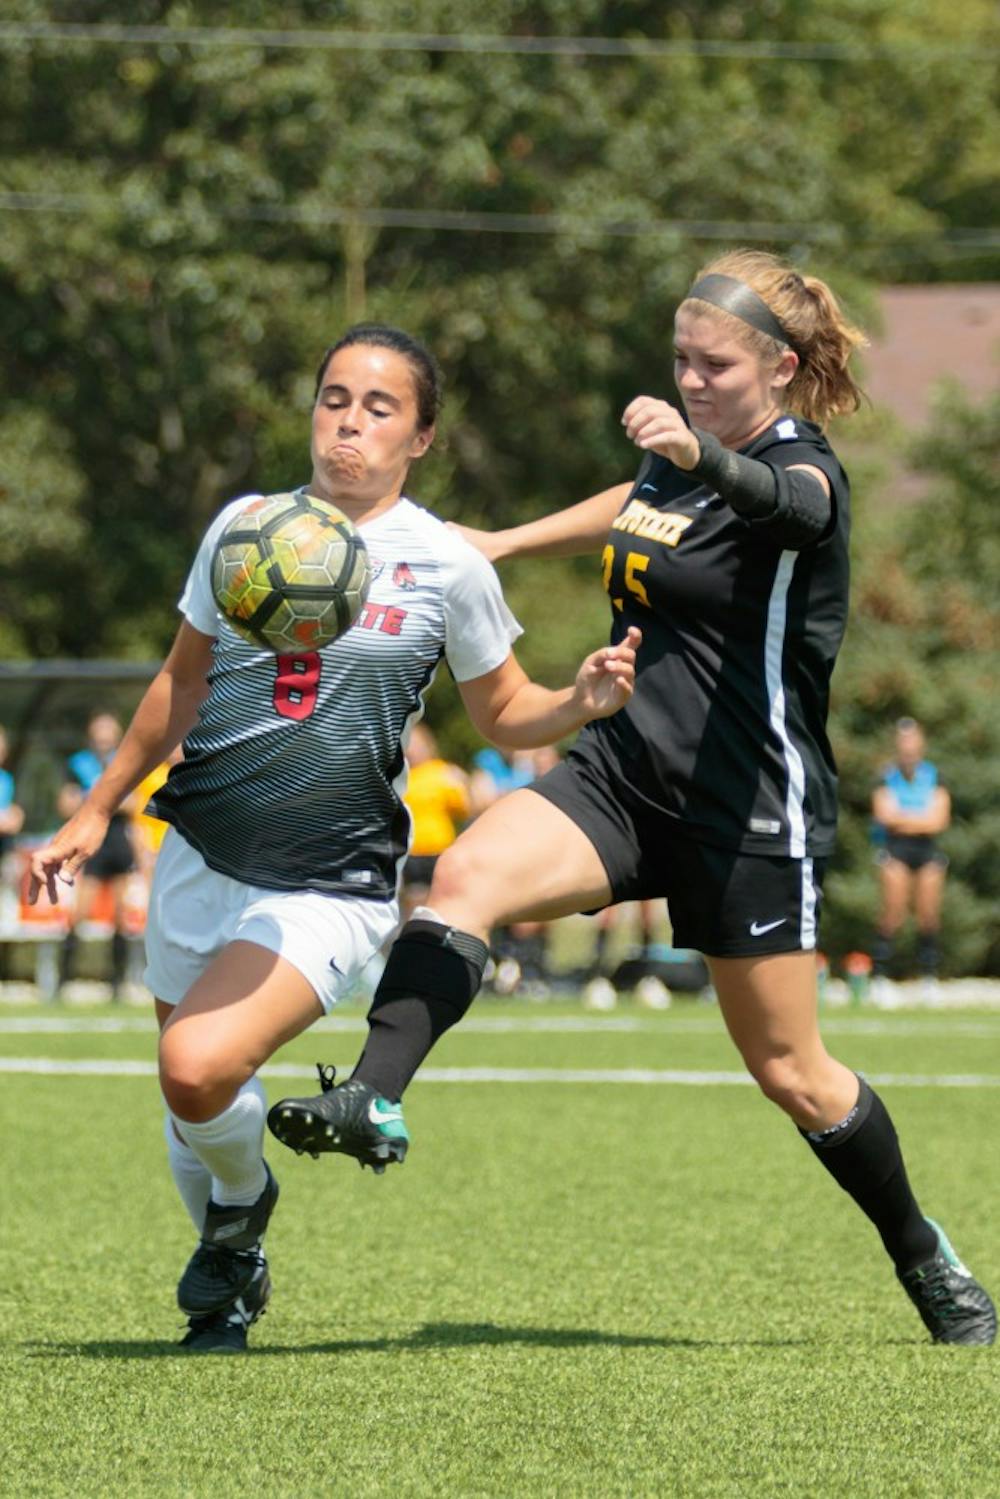 <p>Junior midfielder Paula Guerrero gains control over the ball during the game against Appalachian State at the Briner Sports Complex on Aug. 27. The Cardinals will play Western Illinois Sept. 15 on senior night. Kyle Crawford, DN File</p>